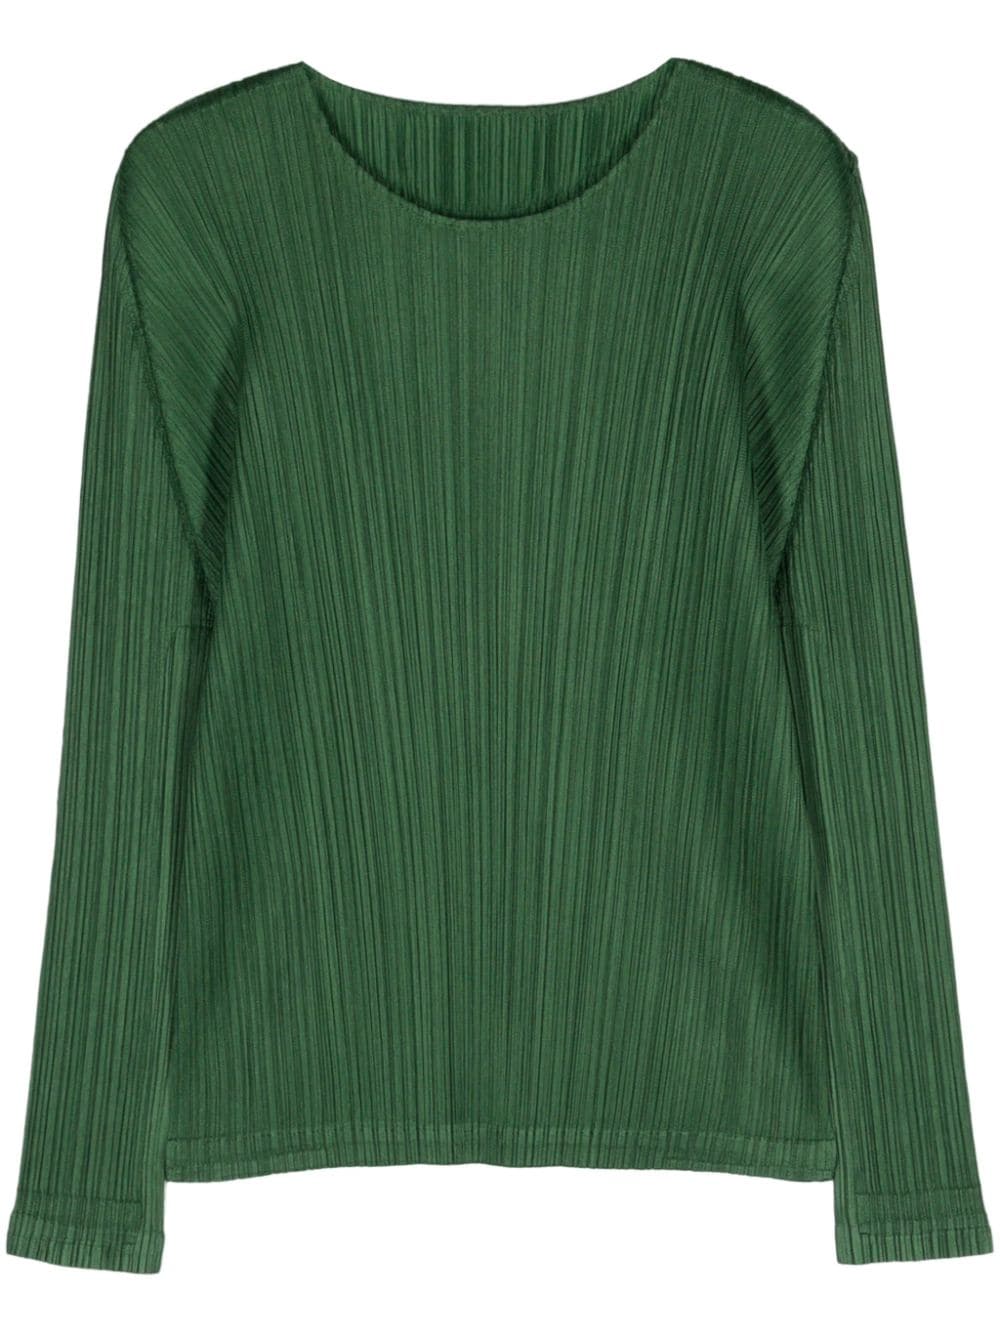 Issey Miyake February Pleated Top In Green